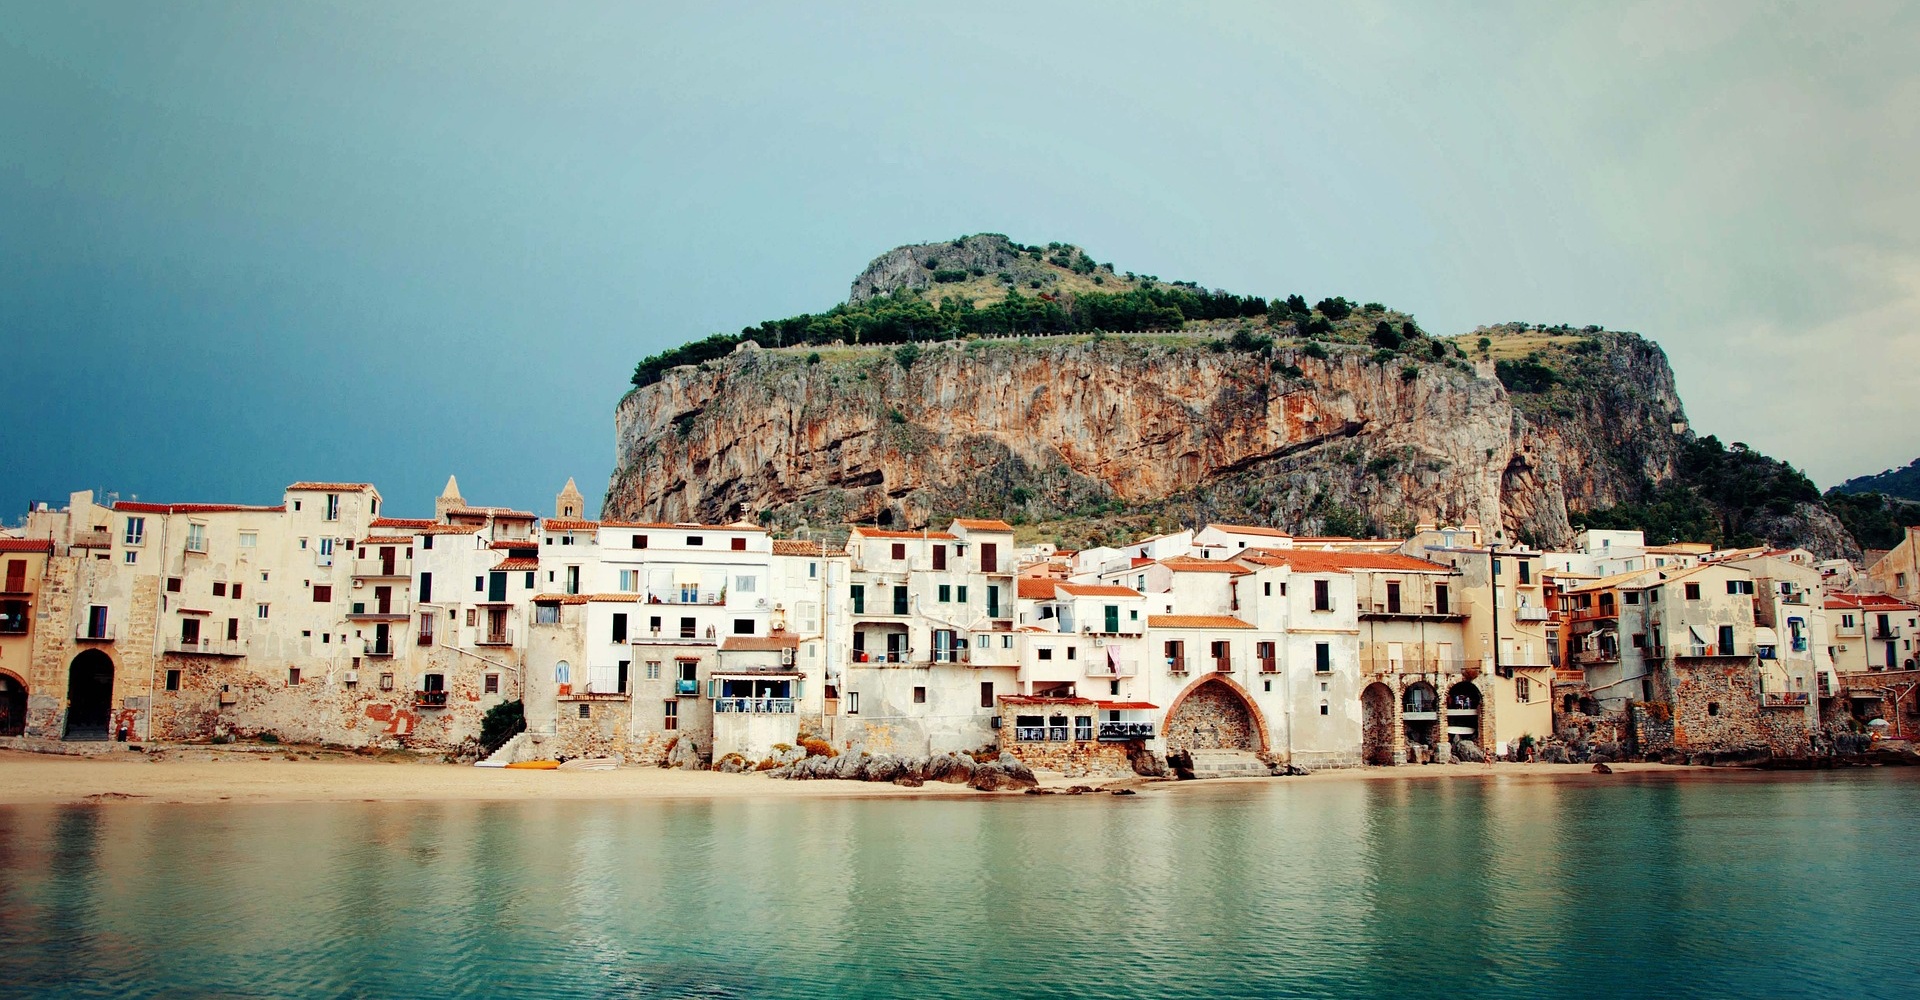 The Most Beautiful Coastal Towns in Italy